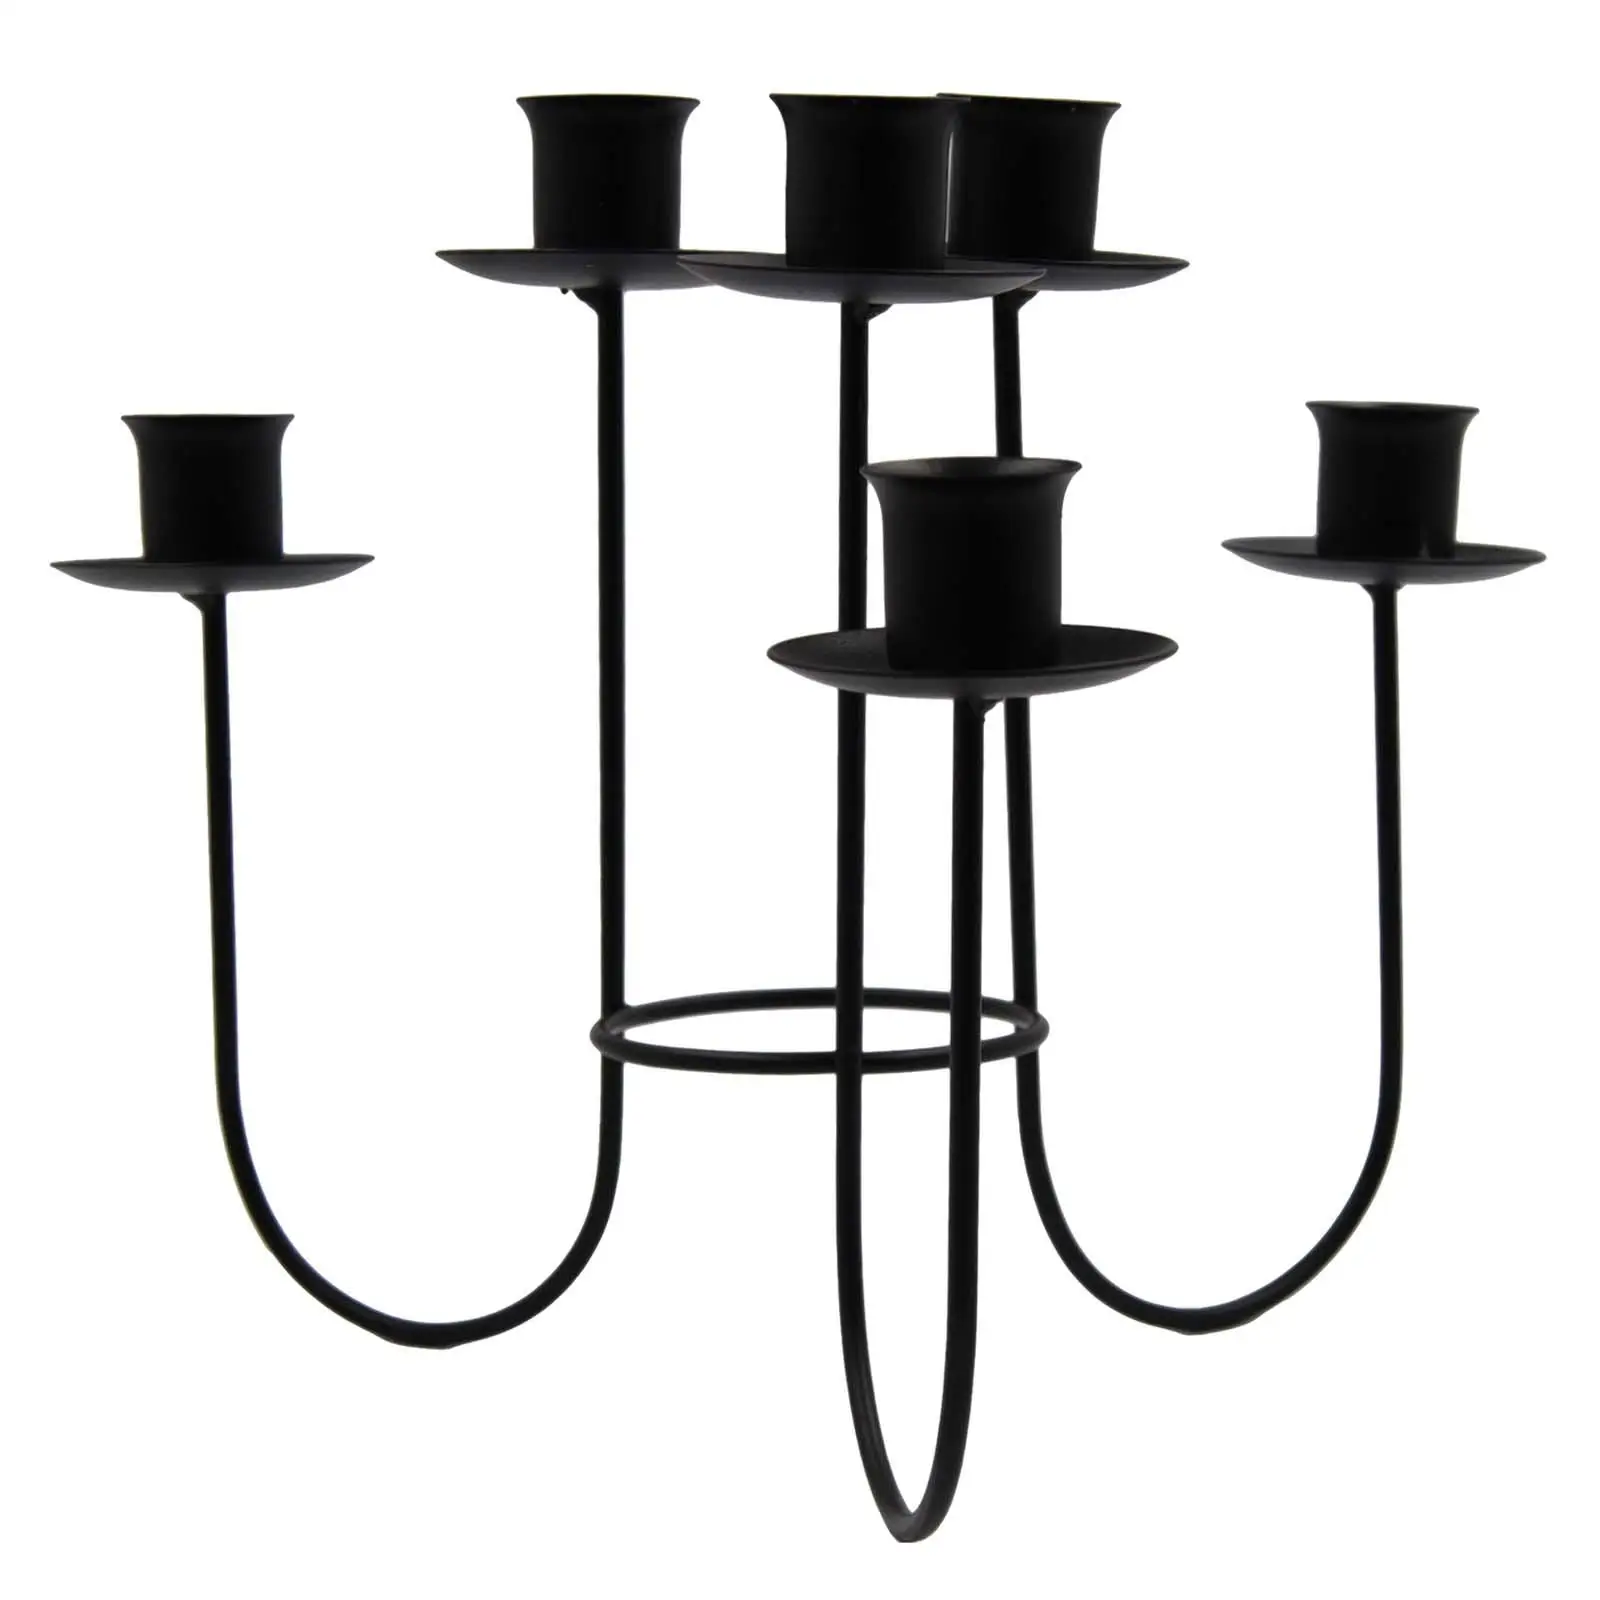 Multi Arms Metal Candle Holder Candle Stand 10x8inch Decorative Iron Art Table